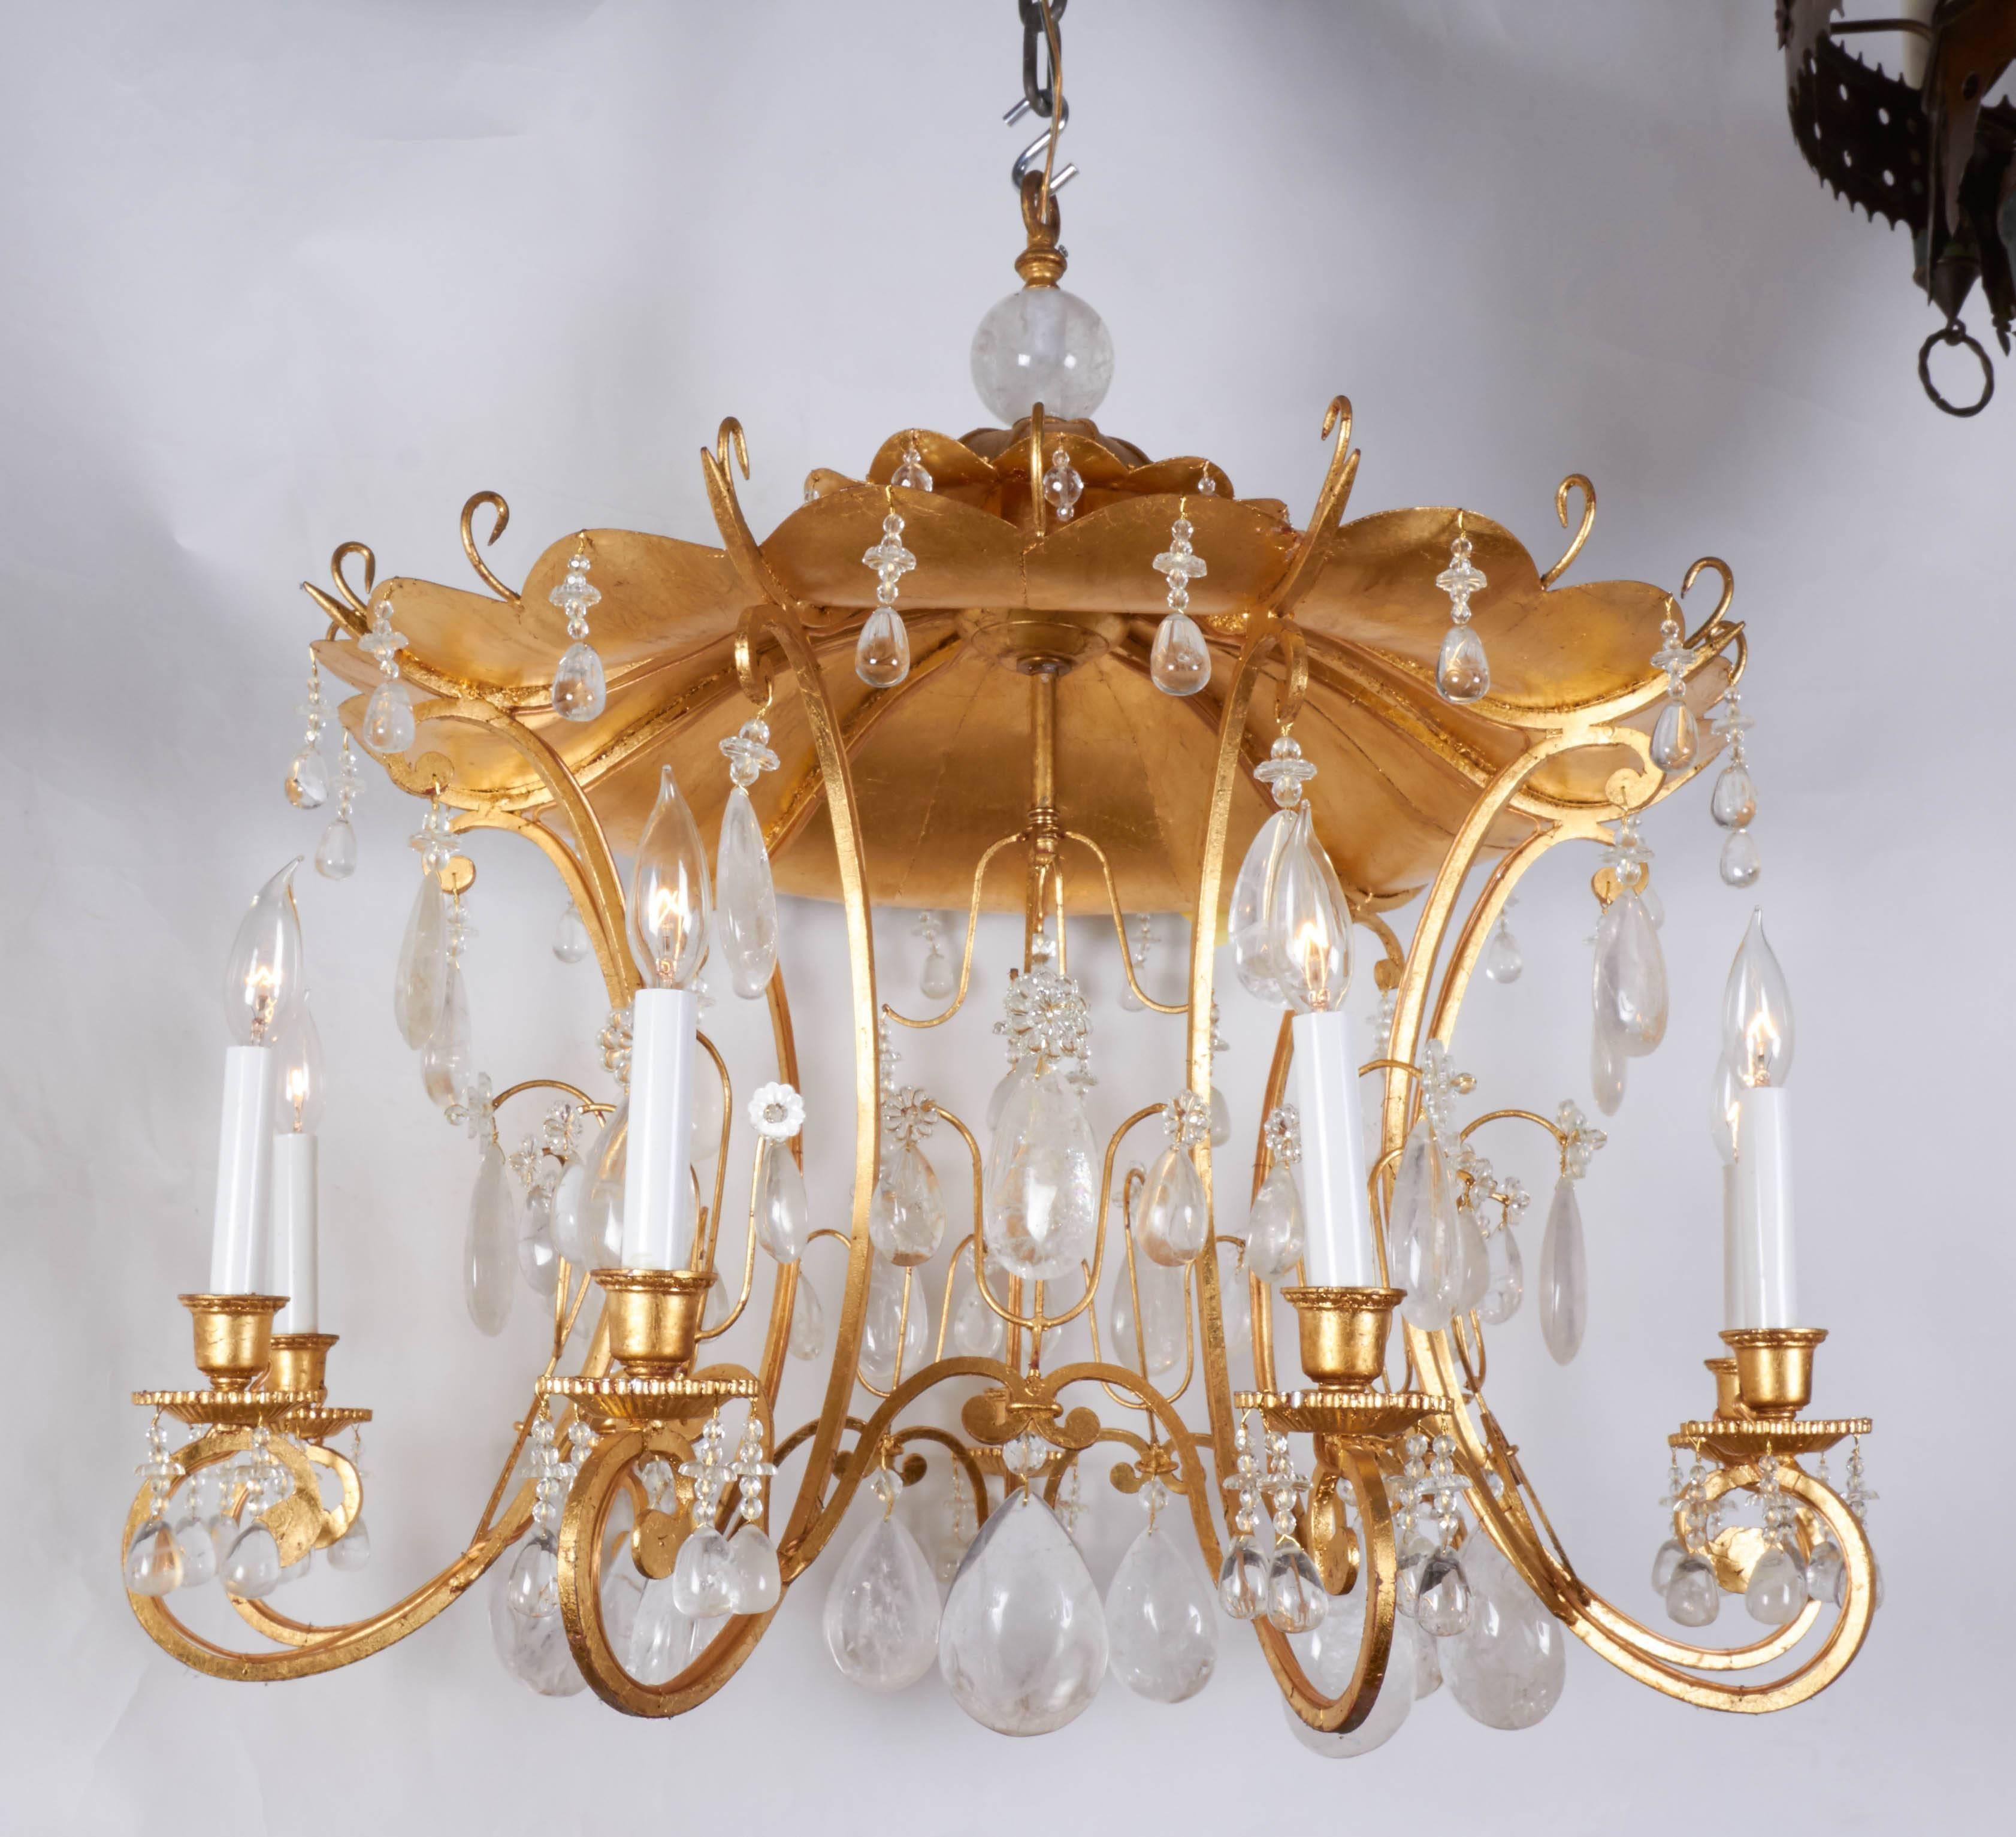 A new chinoserie style rock crystal and gilt metal eight-light chandelier, the pagoda with eight out-scrolled candle-branches suspending faceted rock crystal drops, in the manner of Maison Bagues.